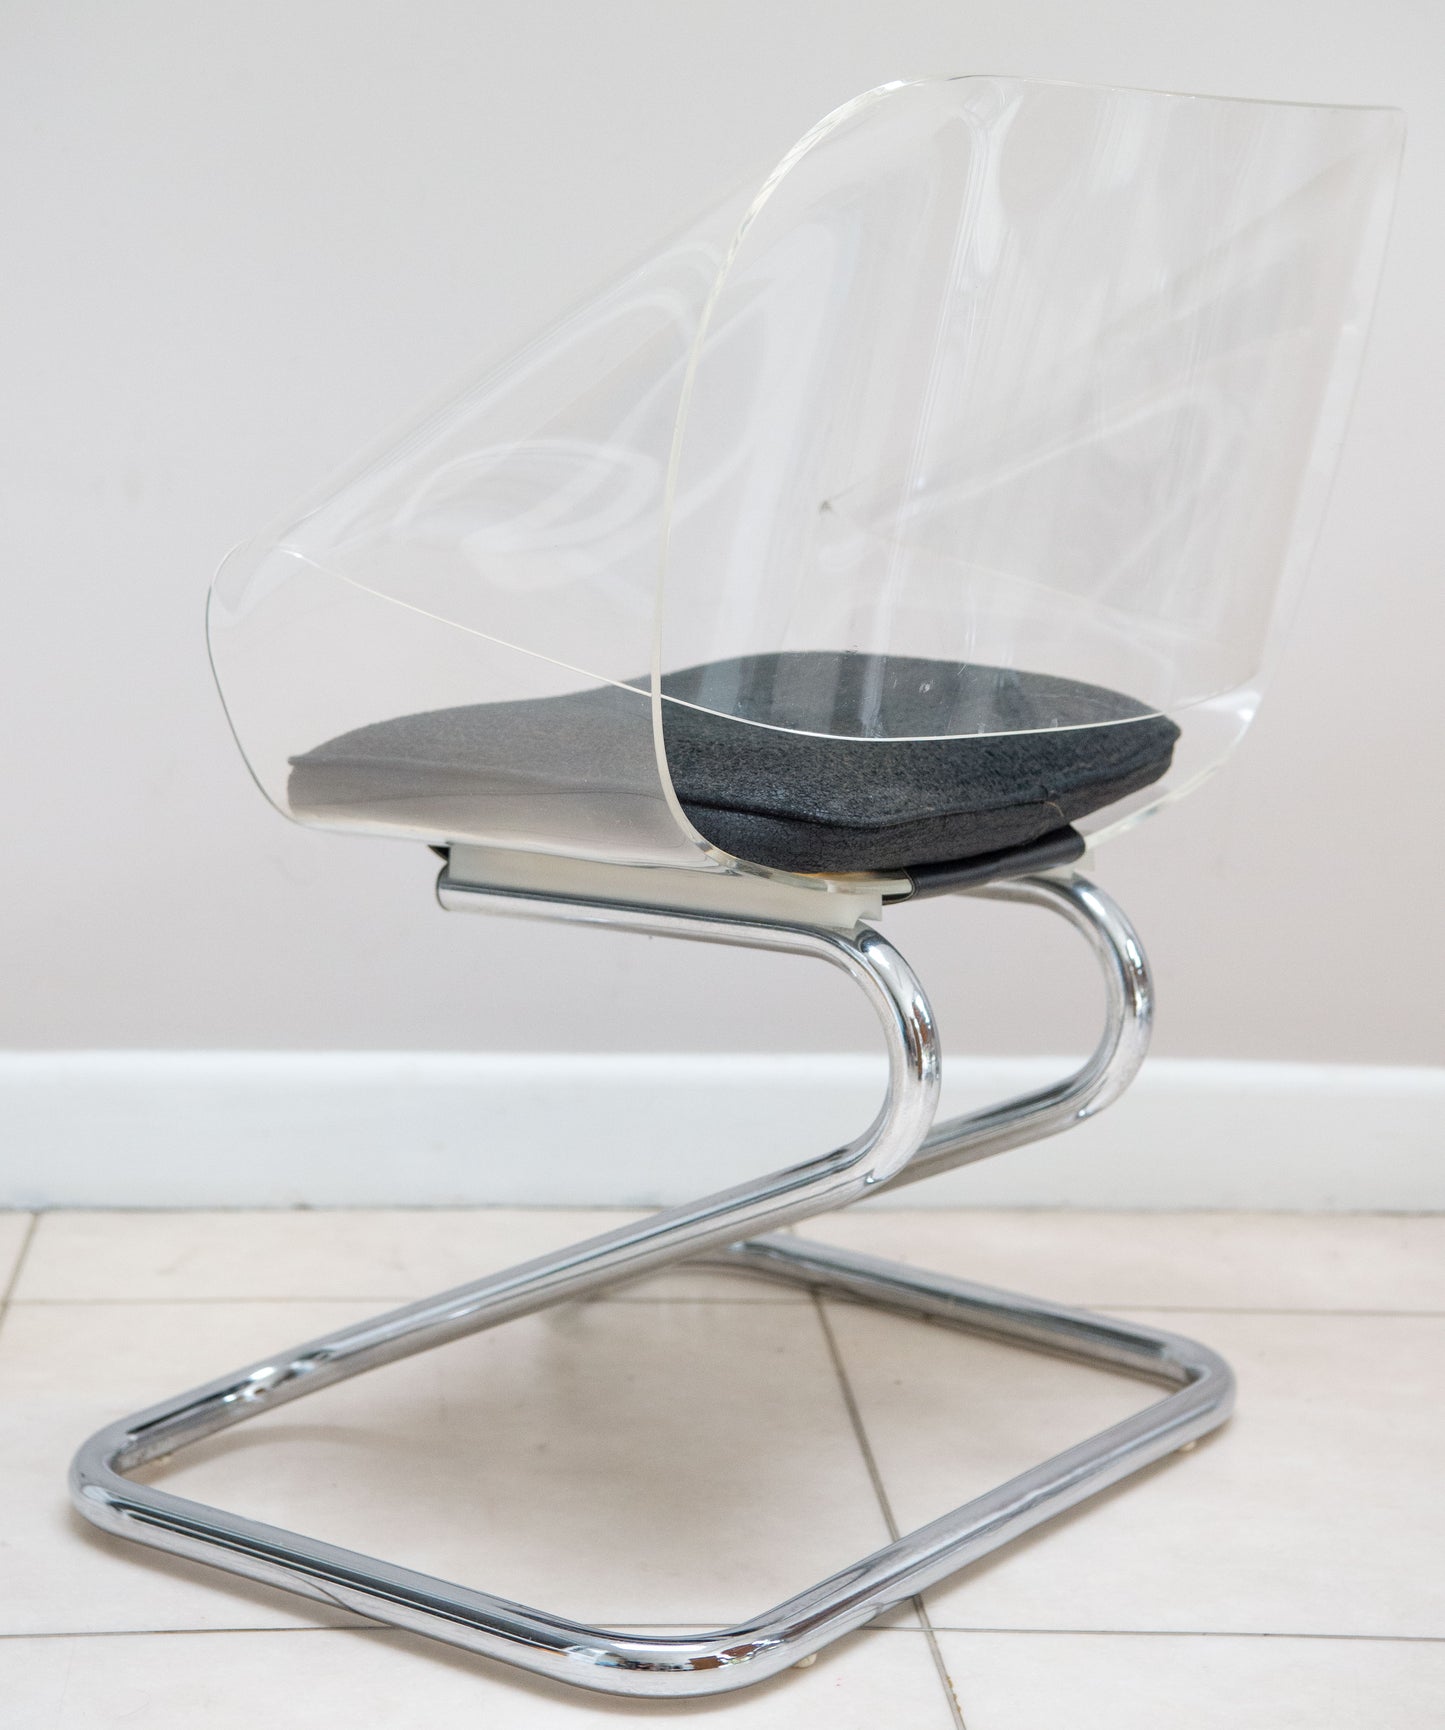 Guzzini Childs Size Armchair In Metal And Acrylic By Harvey Guzzini From 1968.